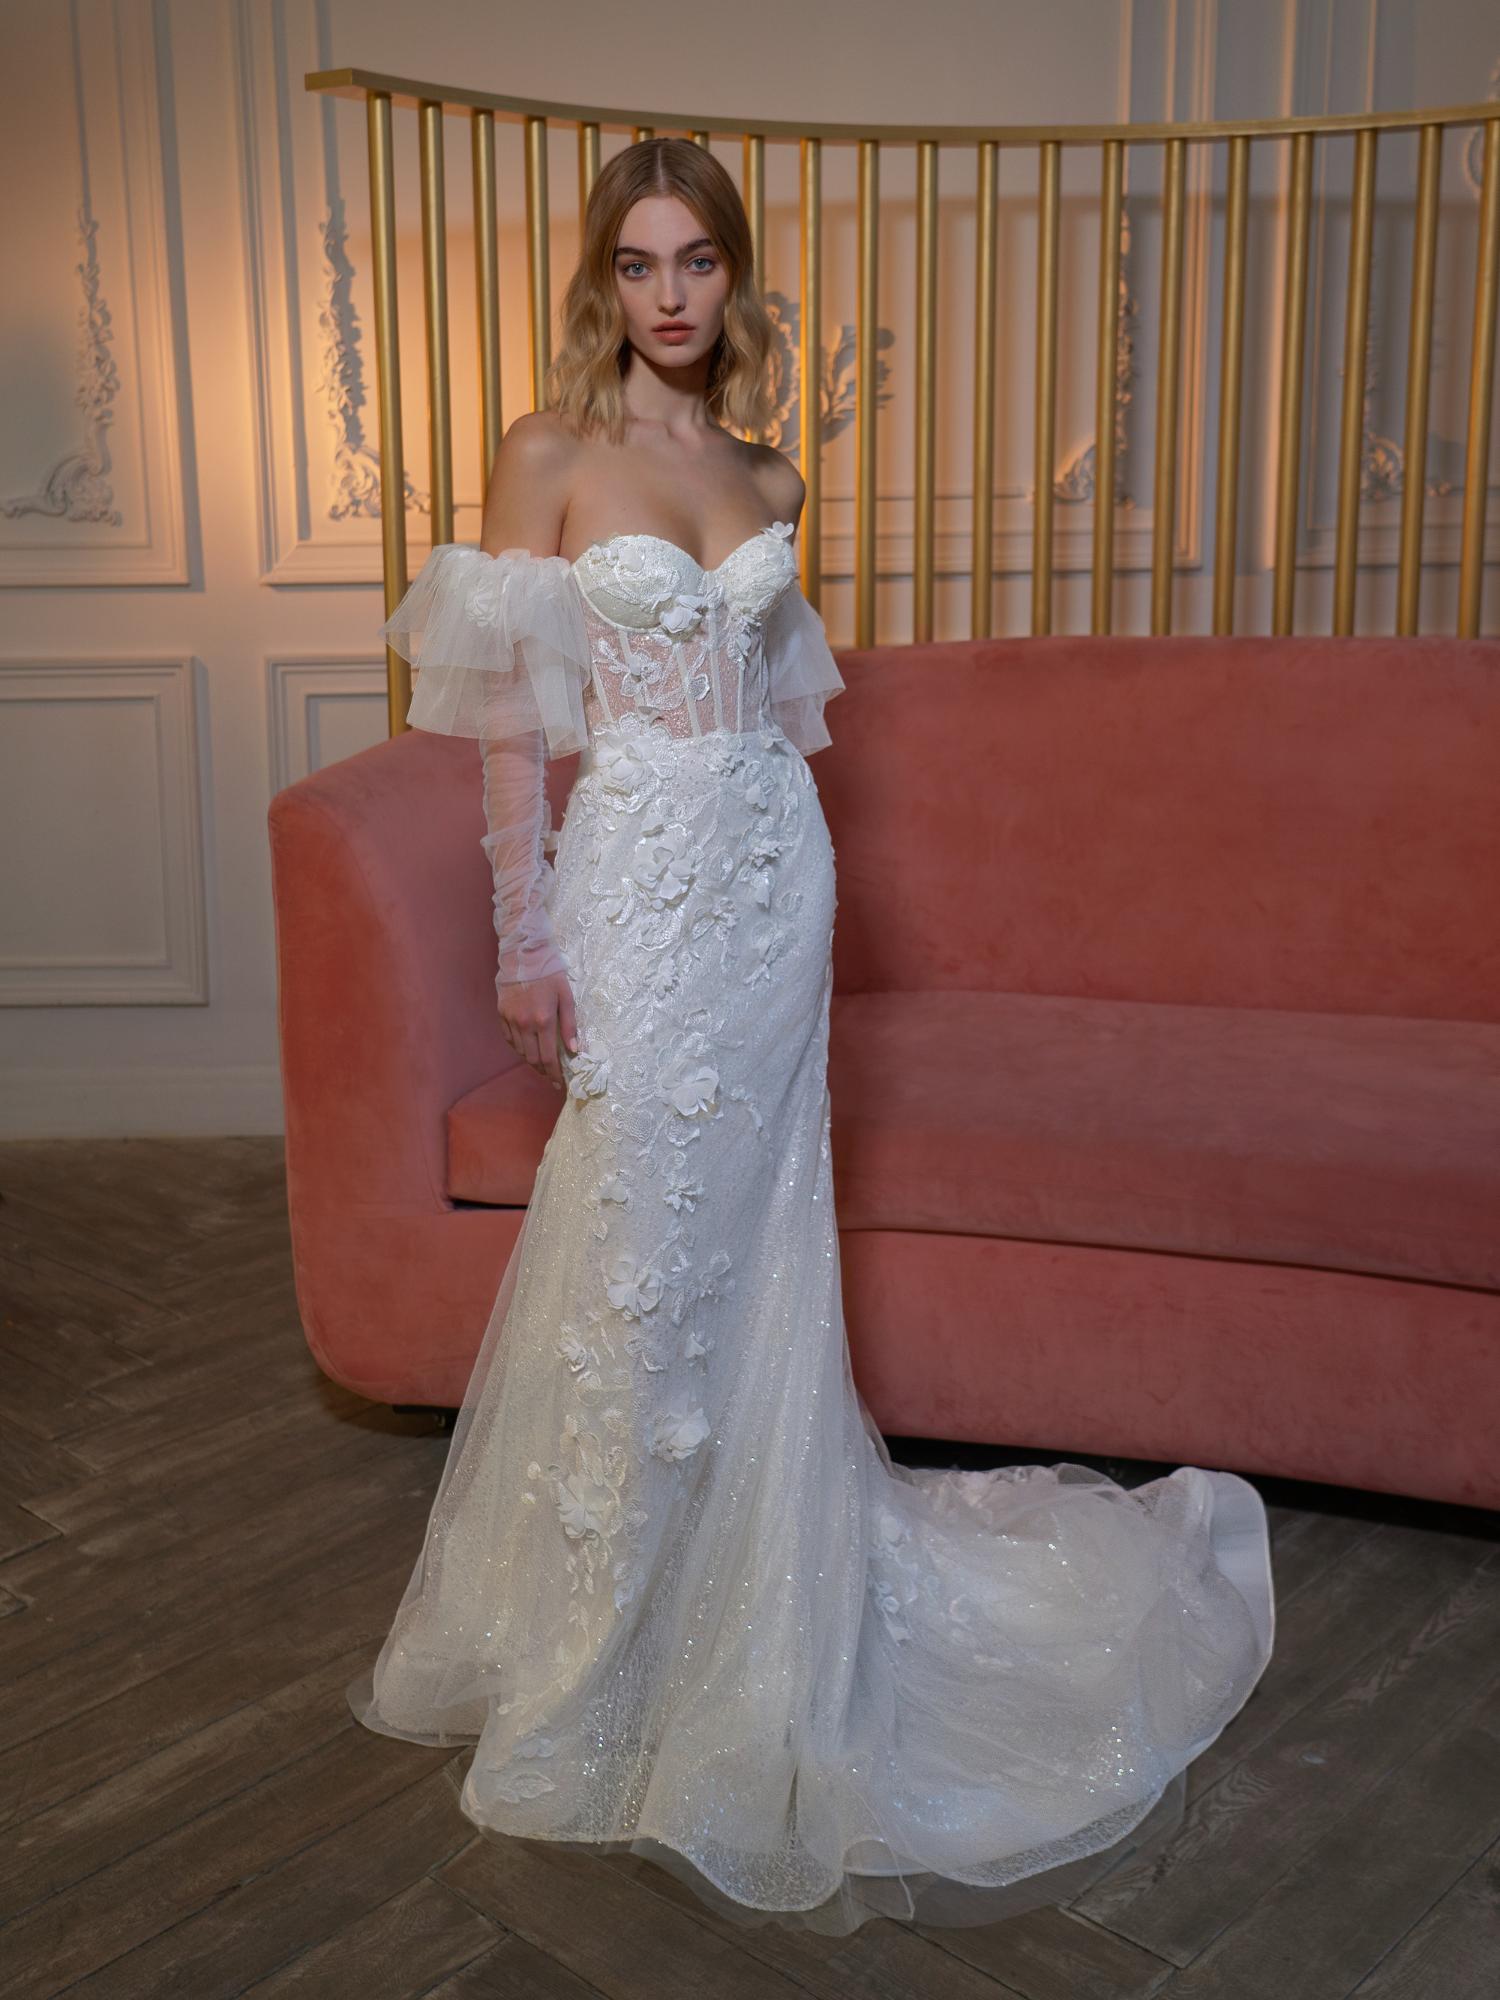 Strapless fit and flare wedding dress with long off-the-shoulder sleeves